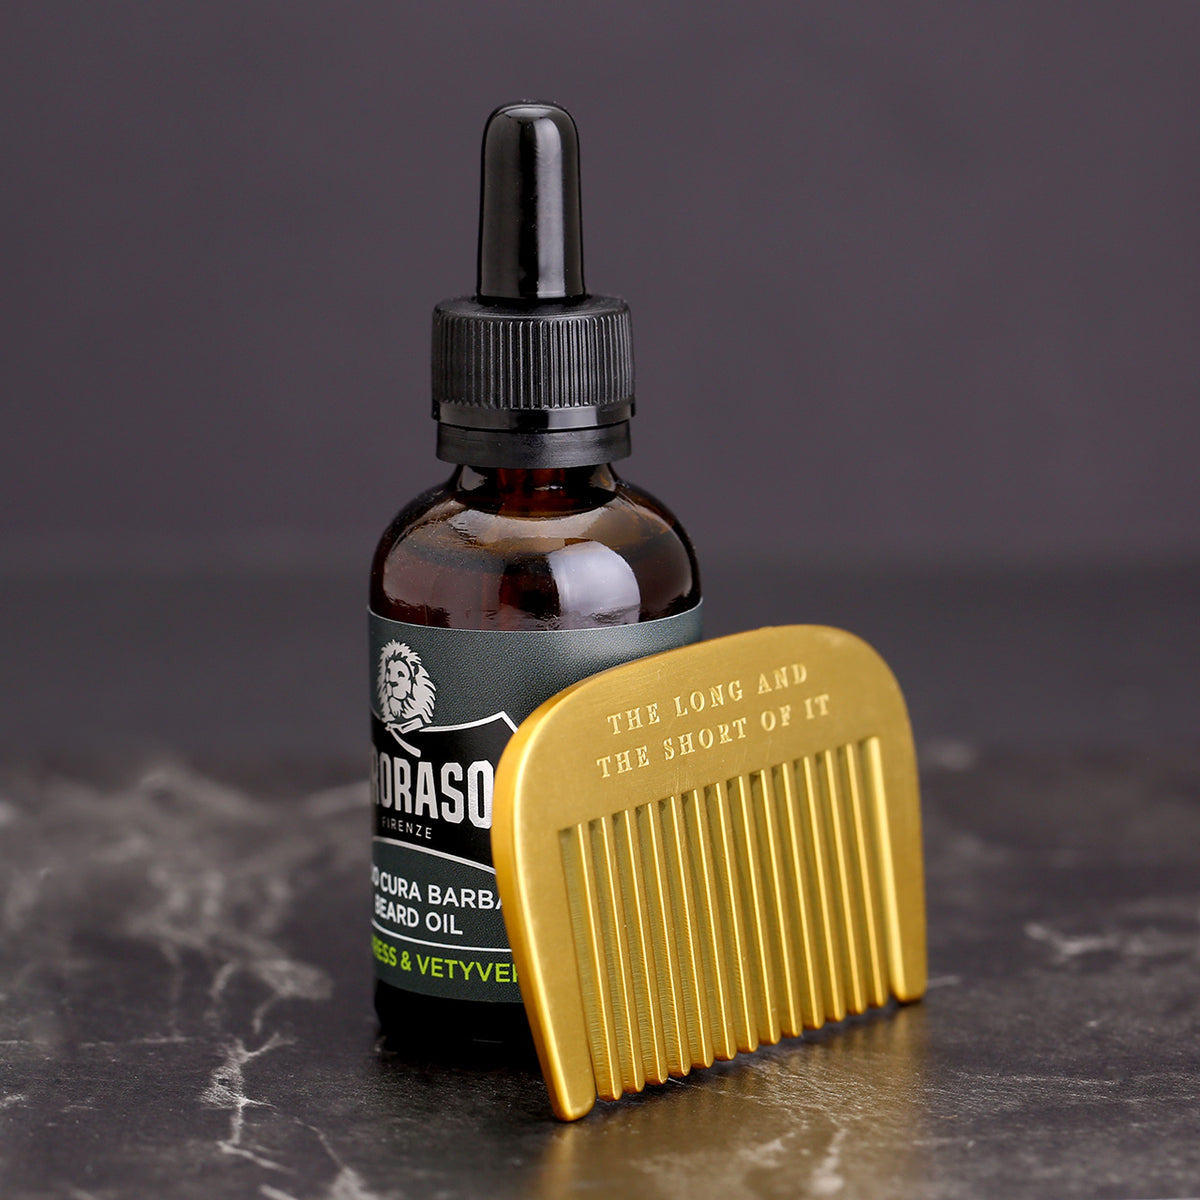 Brass beard comb shown next to a bottle of Proraso Beard Oil for size reference. Beard oil not included